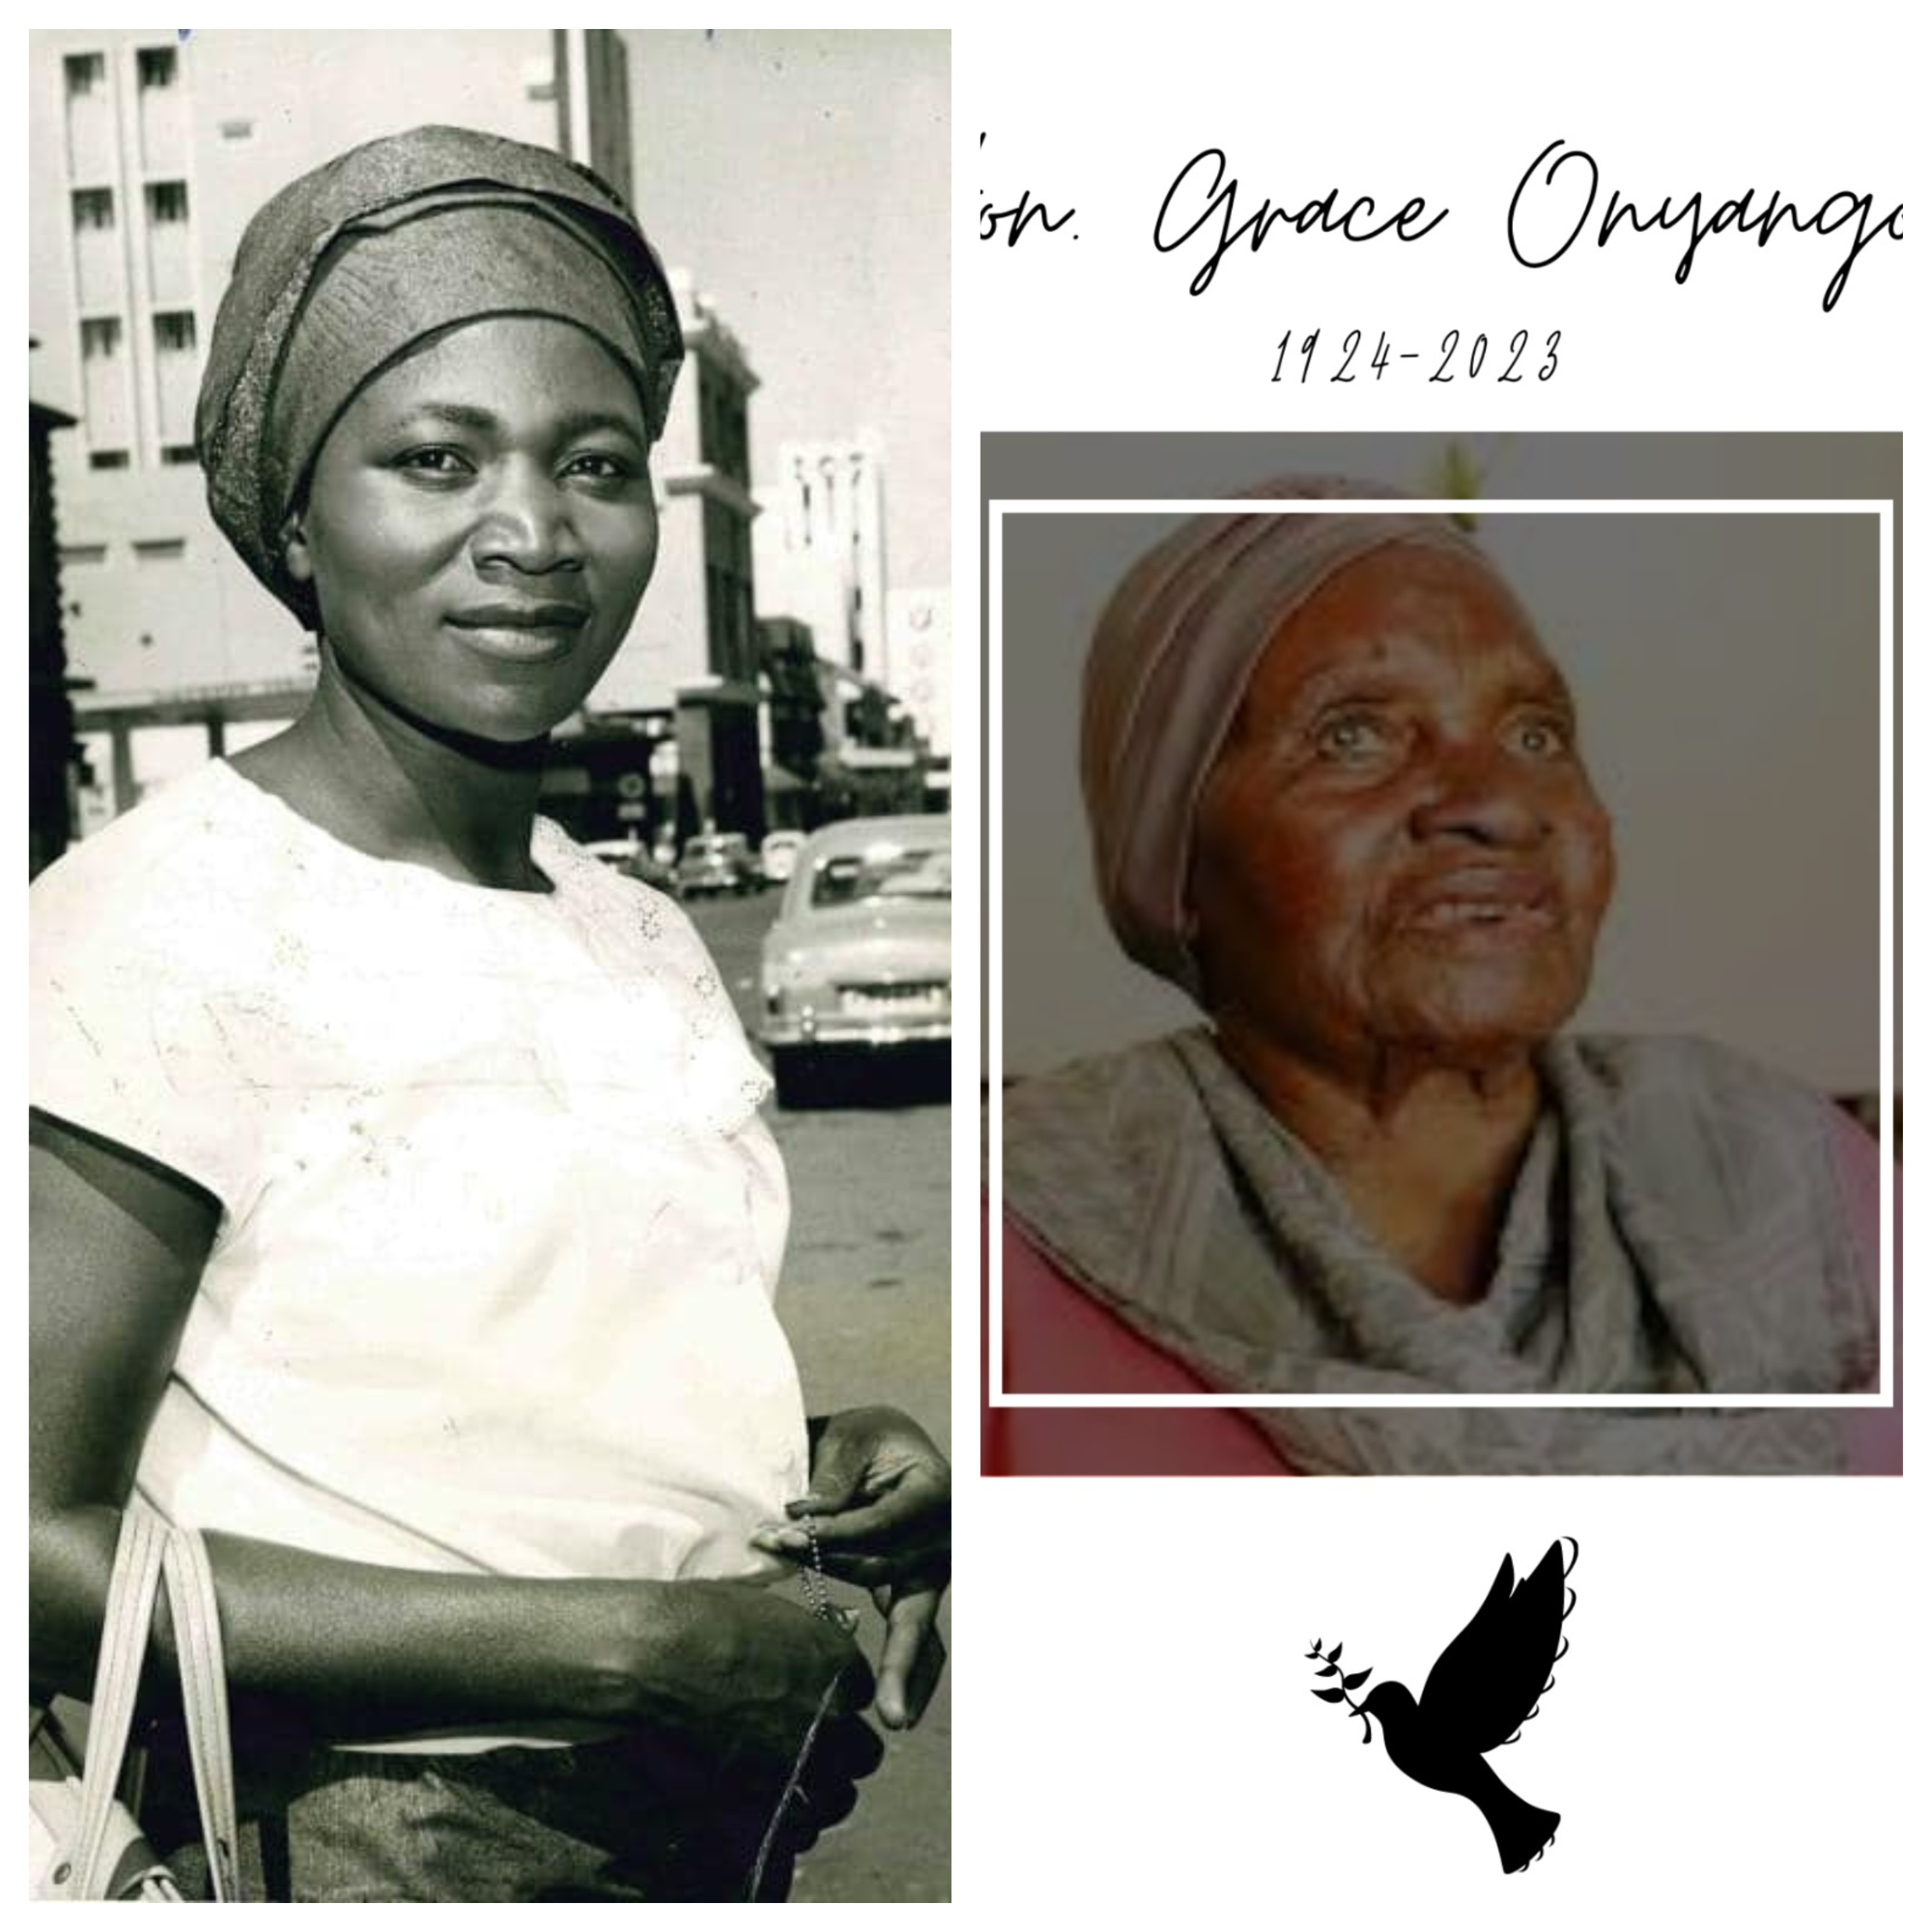 NATIONAL ASSEMBLY PAYS TRIBUTE TO THE FIRST FEMALE MEMBER OF PARLIAMENT, HON. GRACE ONYANGO